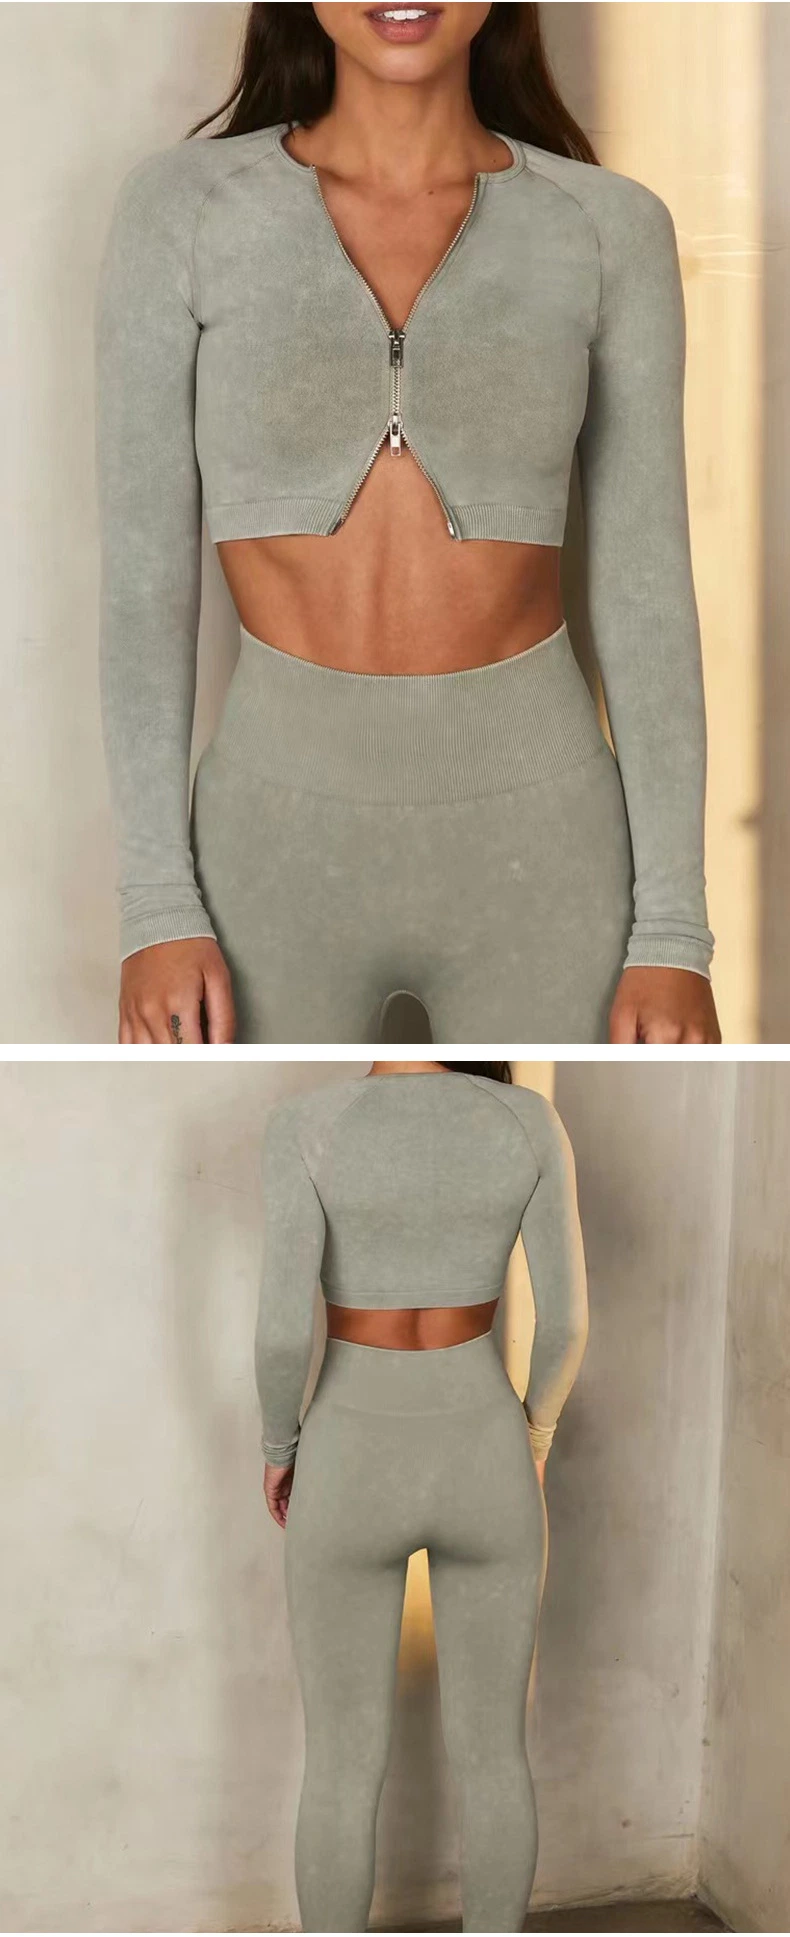 Stock New European Sand-Washed Seamless Yoga Suit Women&prime;s Activewear